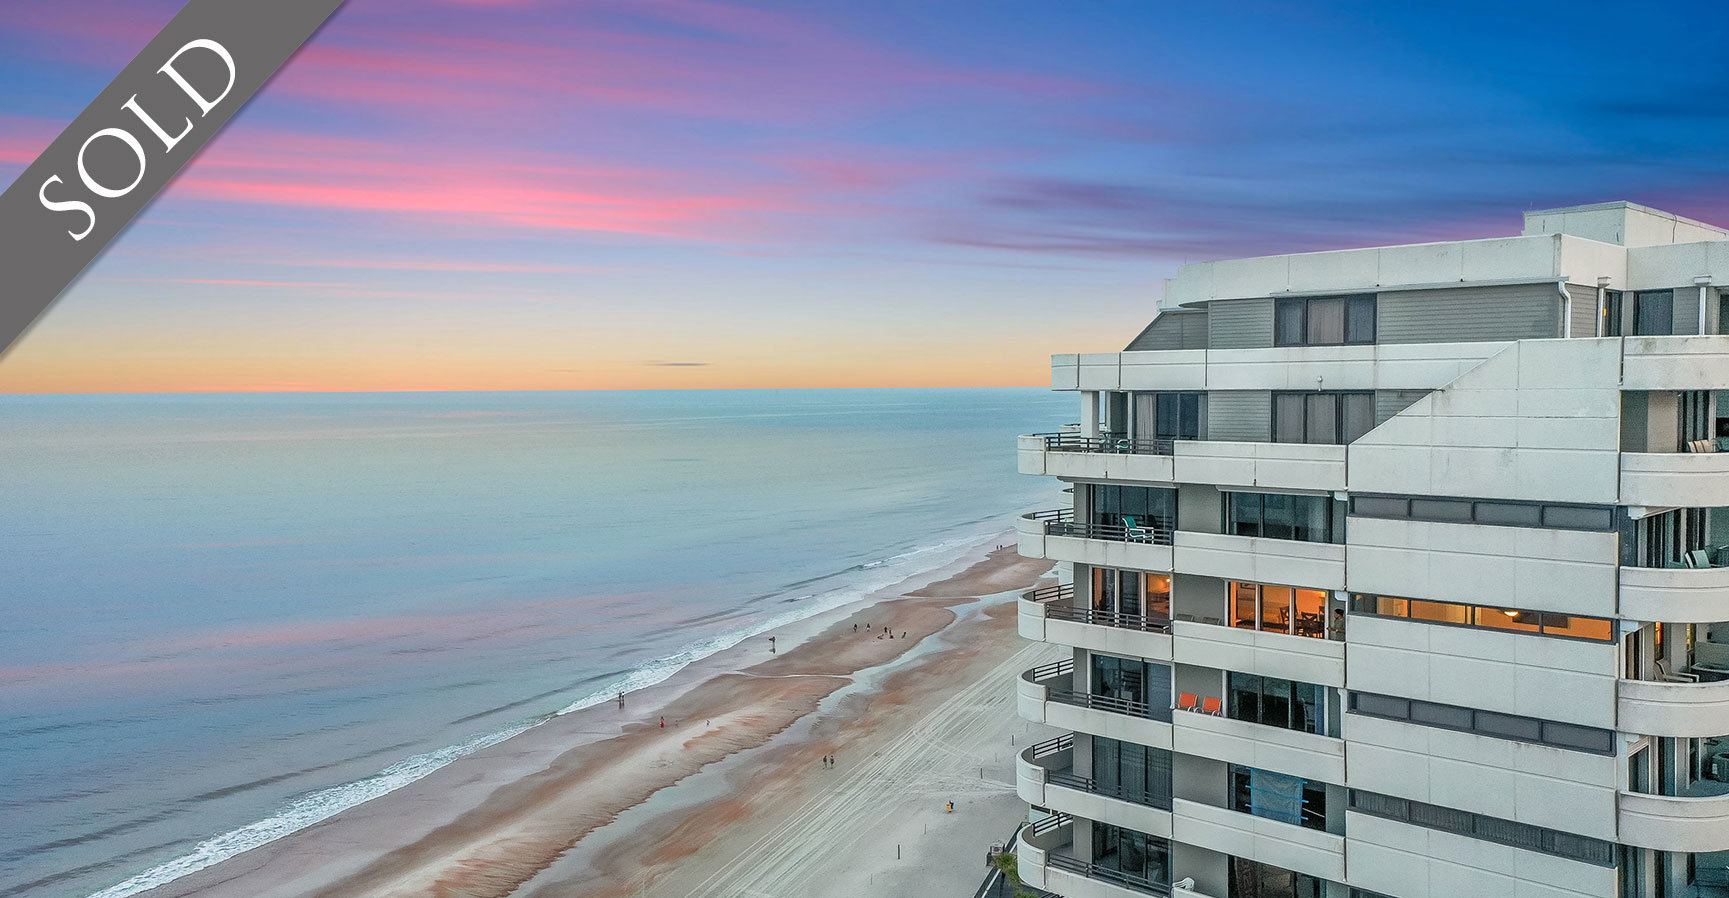 Horizons oceanfront condos For Sale at 1420 N Atlantic Ave Daytona Beach The LUXE Group 386-299-4043 Just Sold